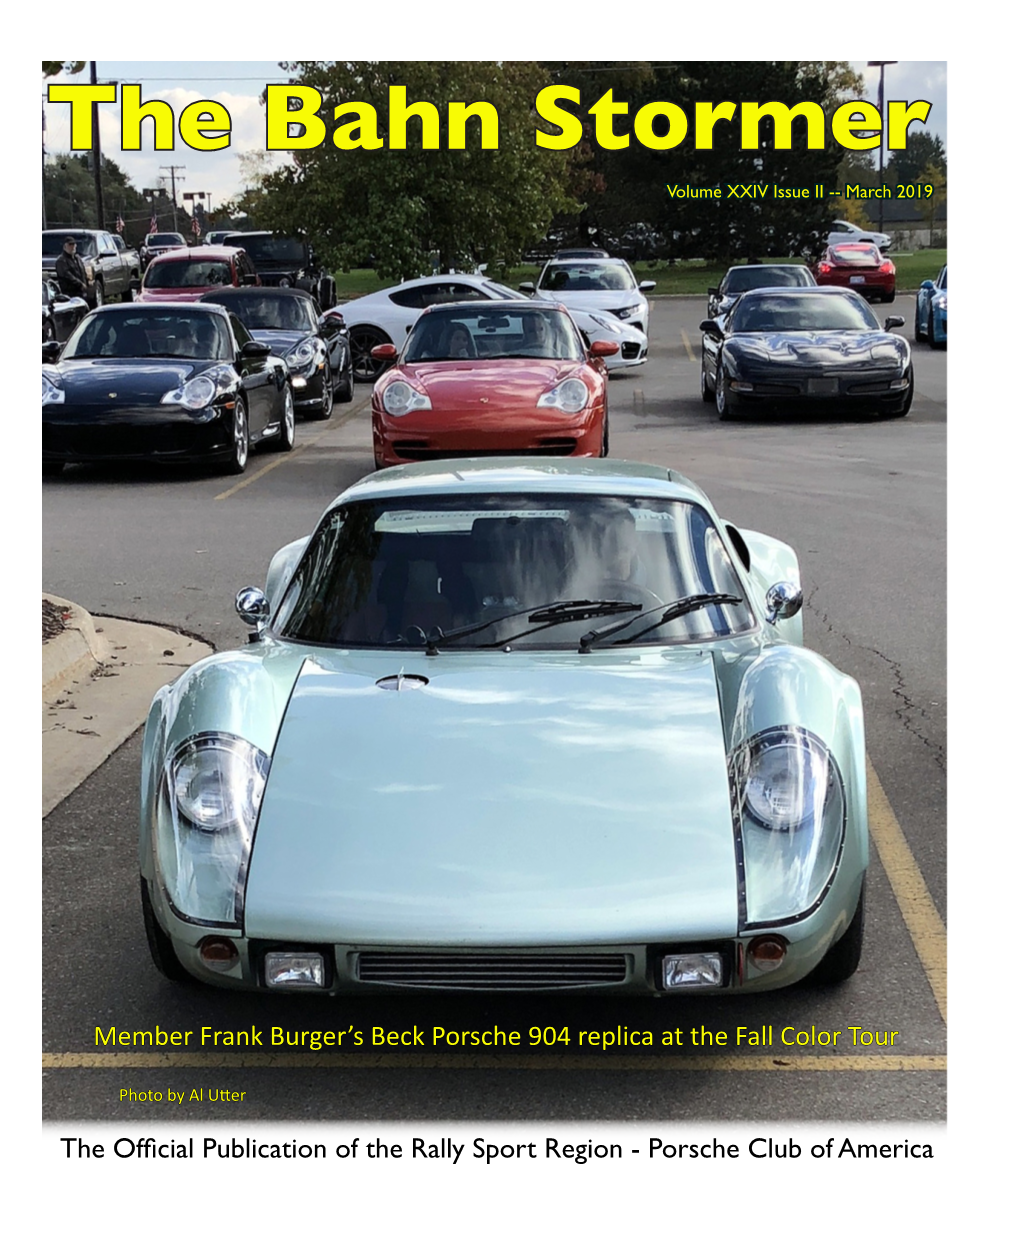 The Bahn Stormer Volume XXIV Issue II -- March 2019